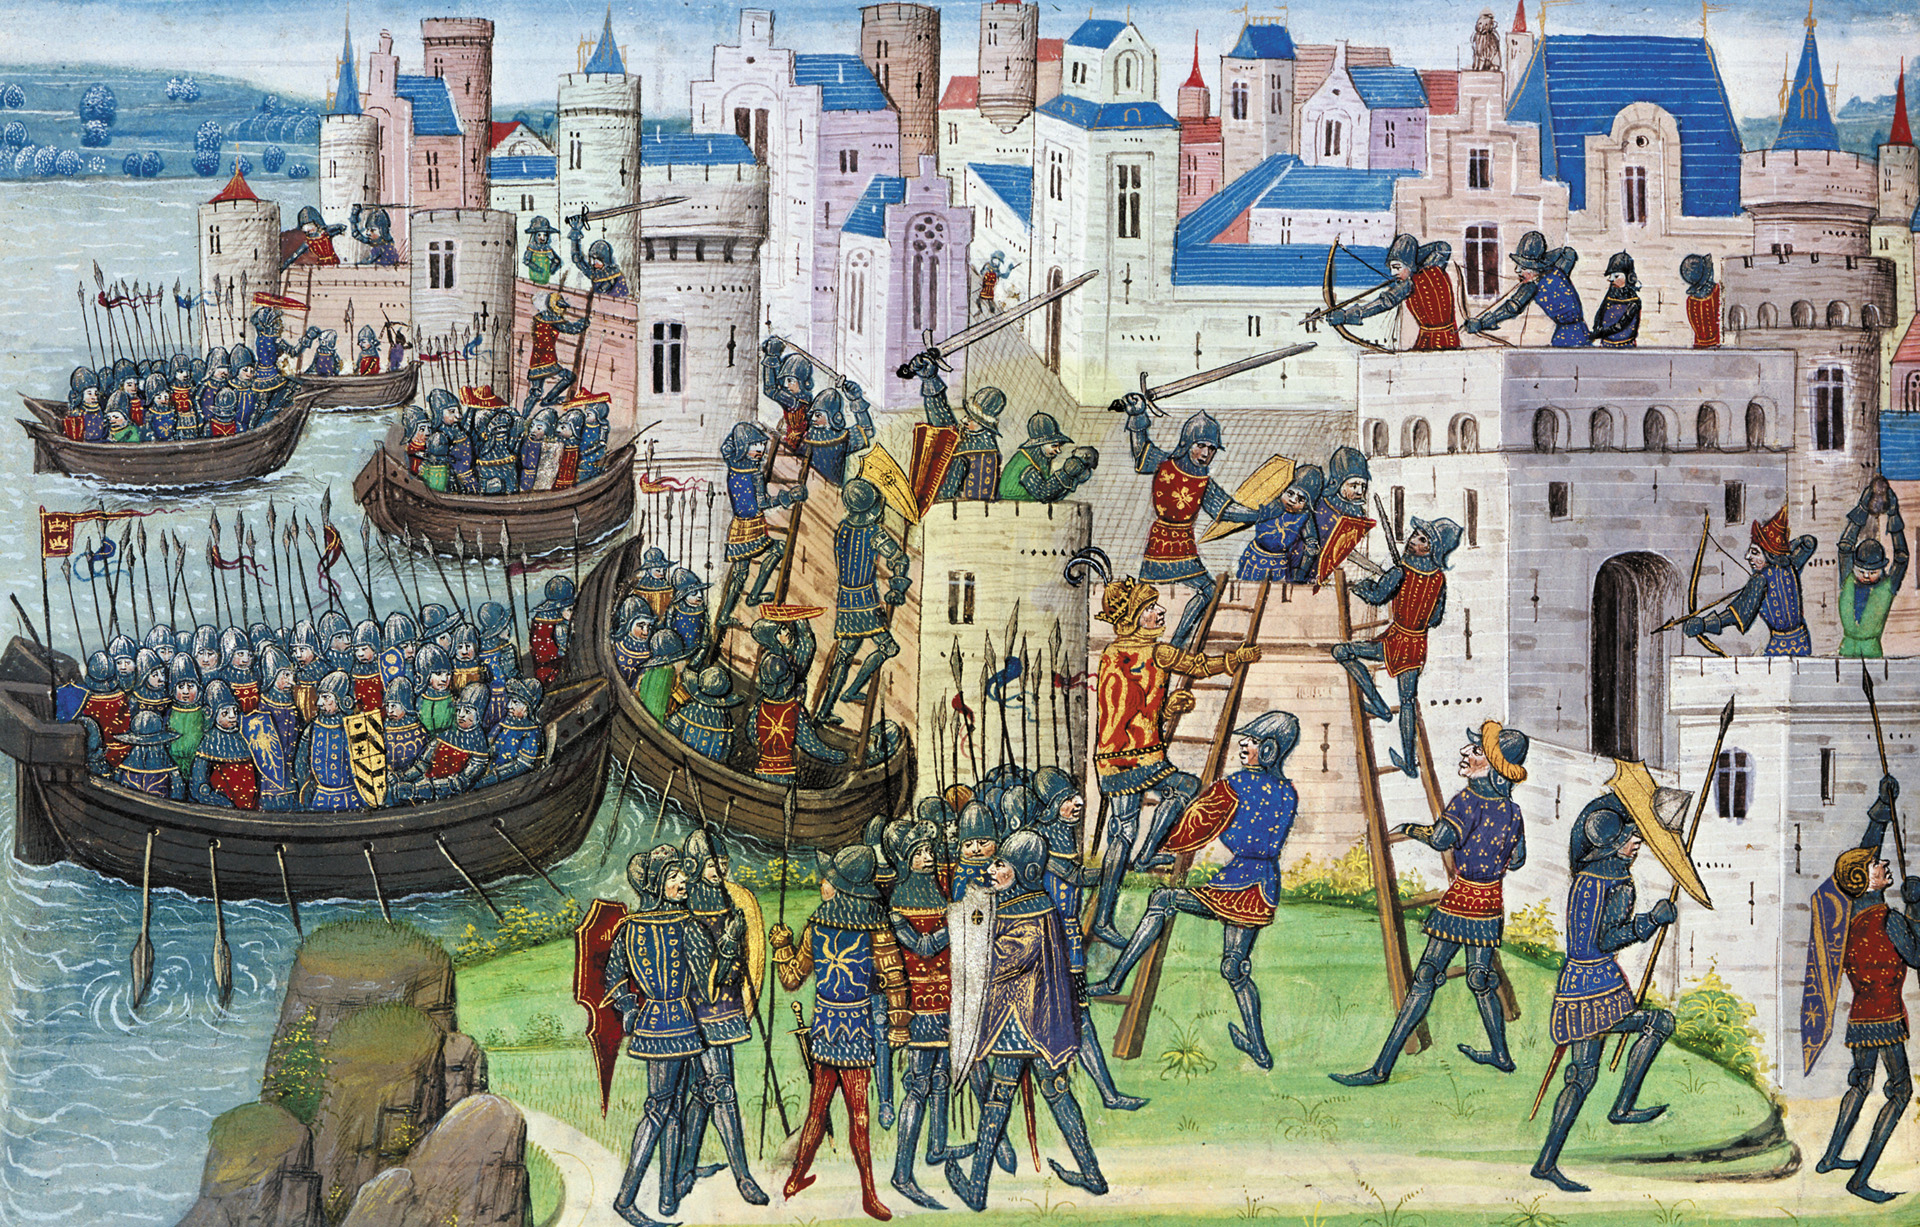 A medieval manuscript, while lacking realism, portrays the final stage of the siege when Alexander’s mercenary navy ferried his soldiers to the city.